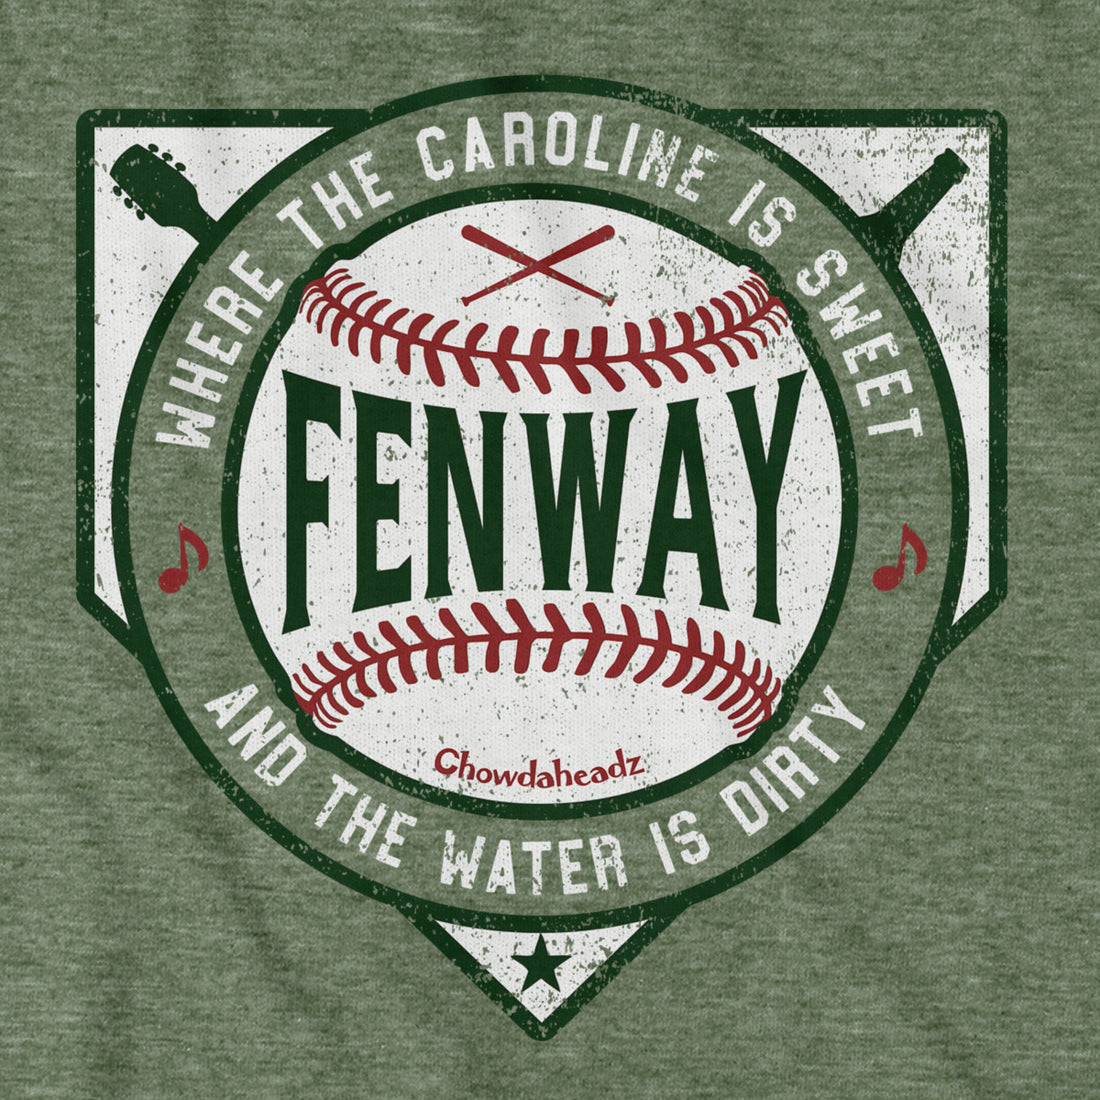 How the Song "Sweet Caroline" Became Famous at Fenway Park